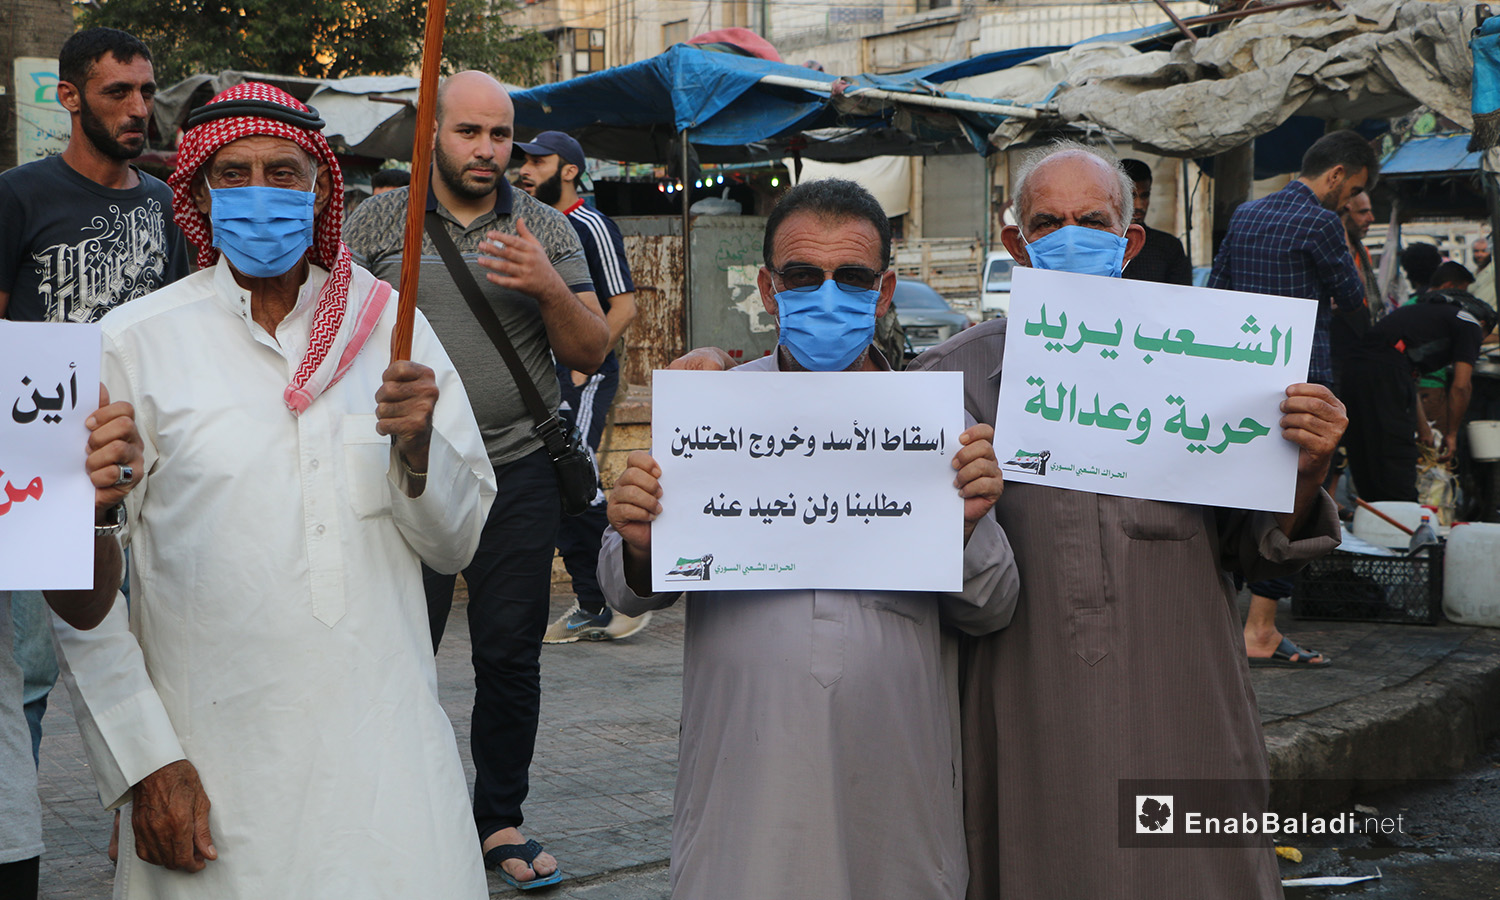 A protest in Idlib city against fuel prices’ increase and high living costs – 04 August 2020 (Enab Baladi / Anas al-Khouli)